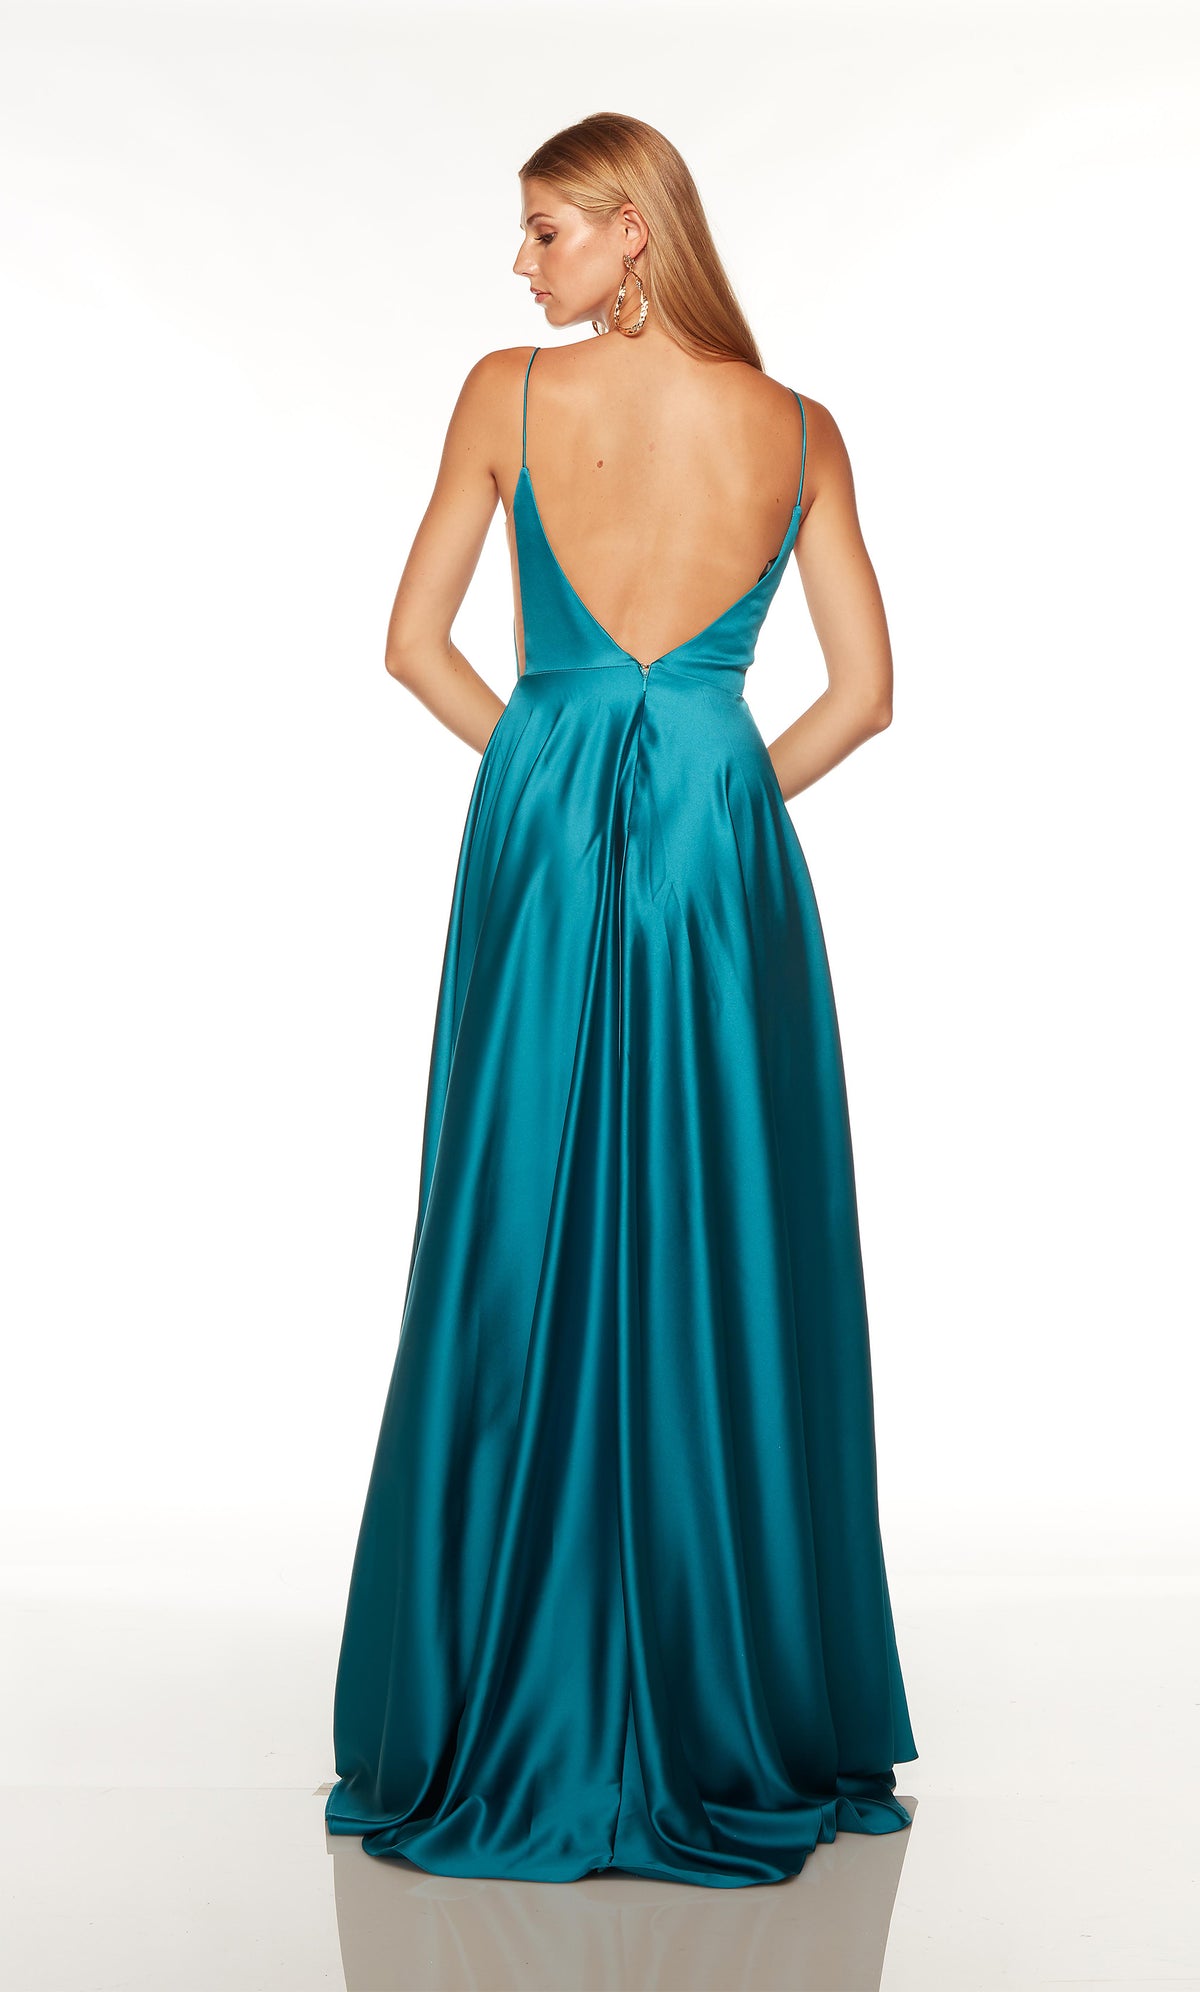 Blue prom dress with a V shaped open back and train.